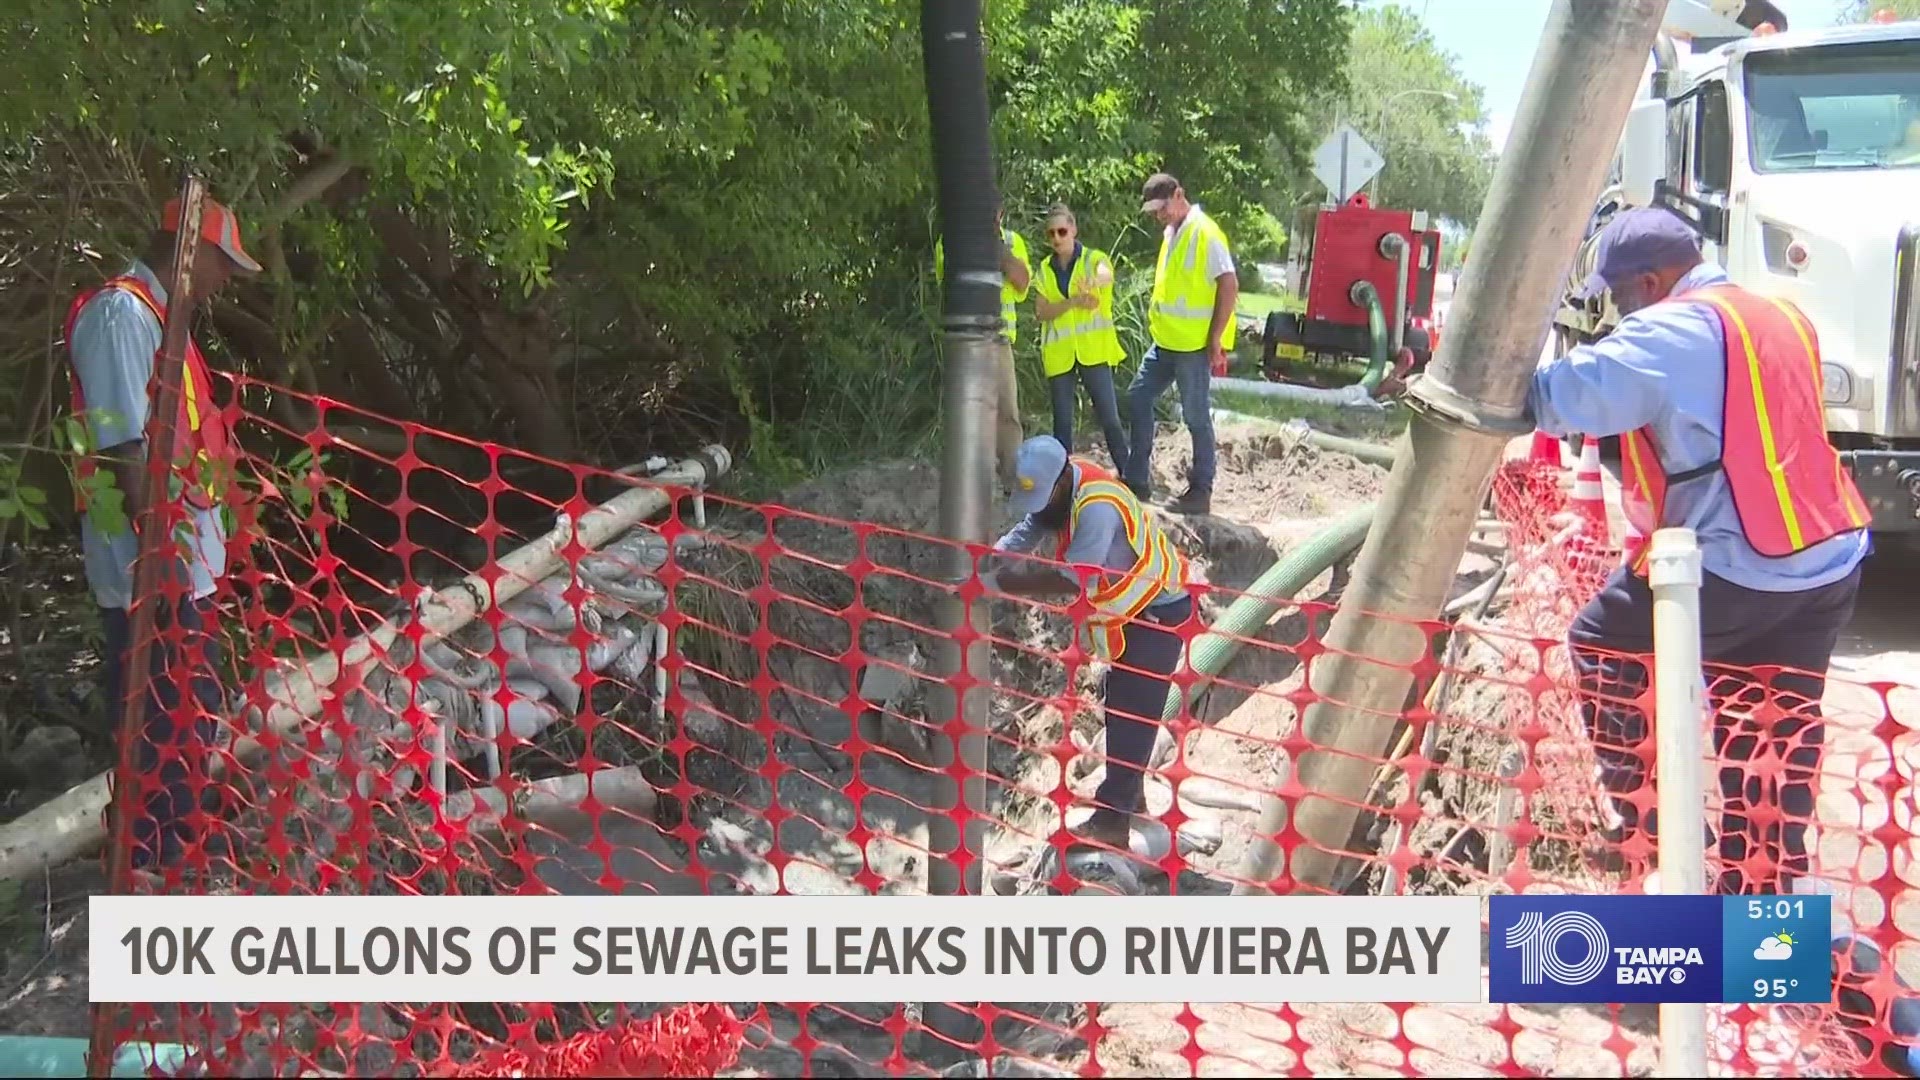 The mile-long sewer line replacement scheduled for 2025 will now begin immediately.